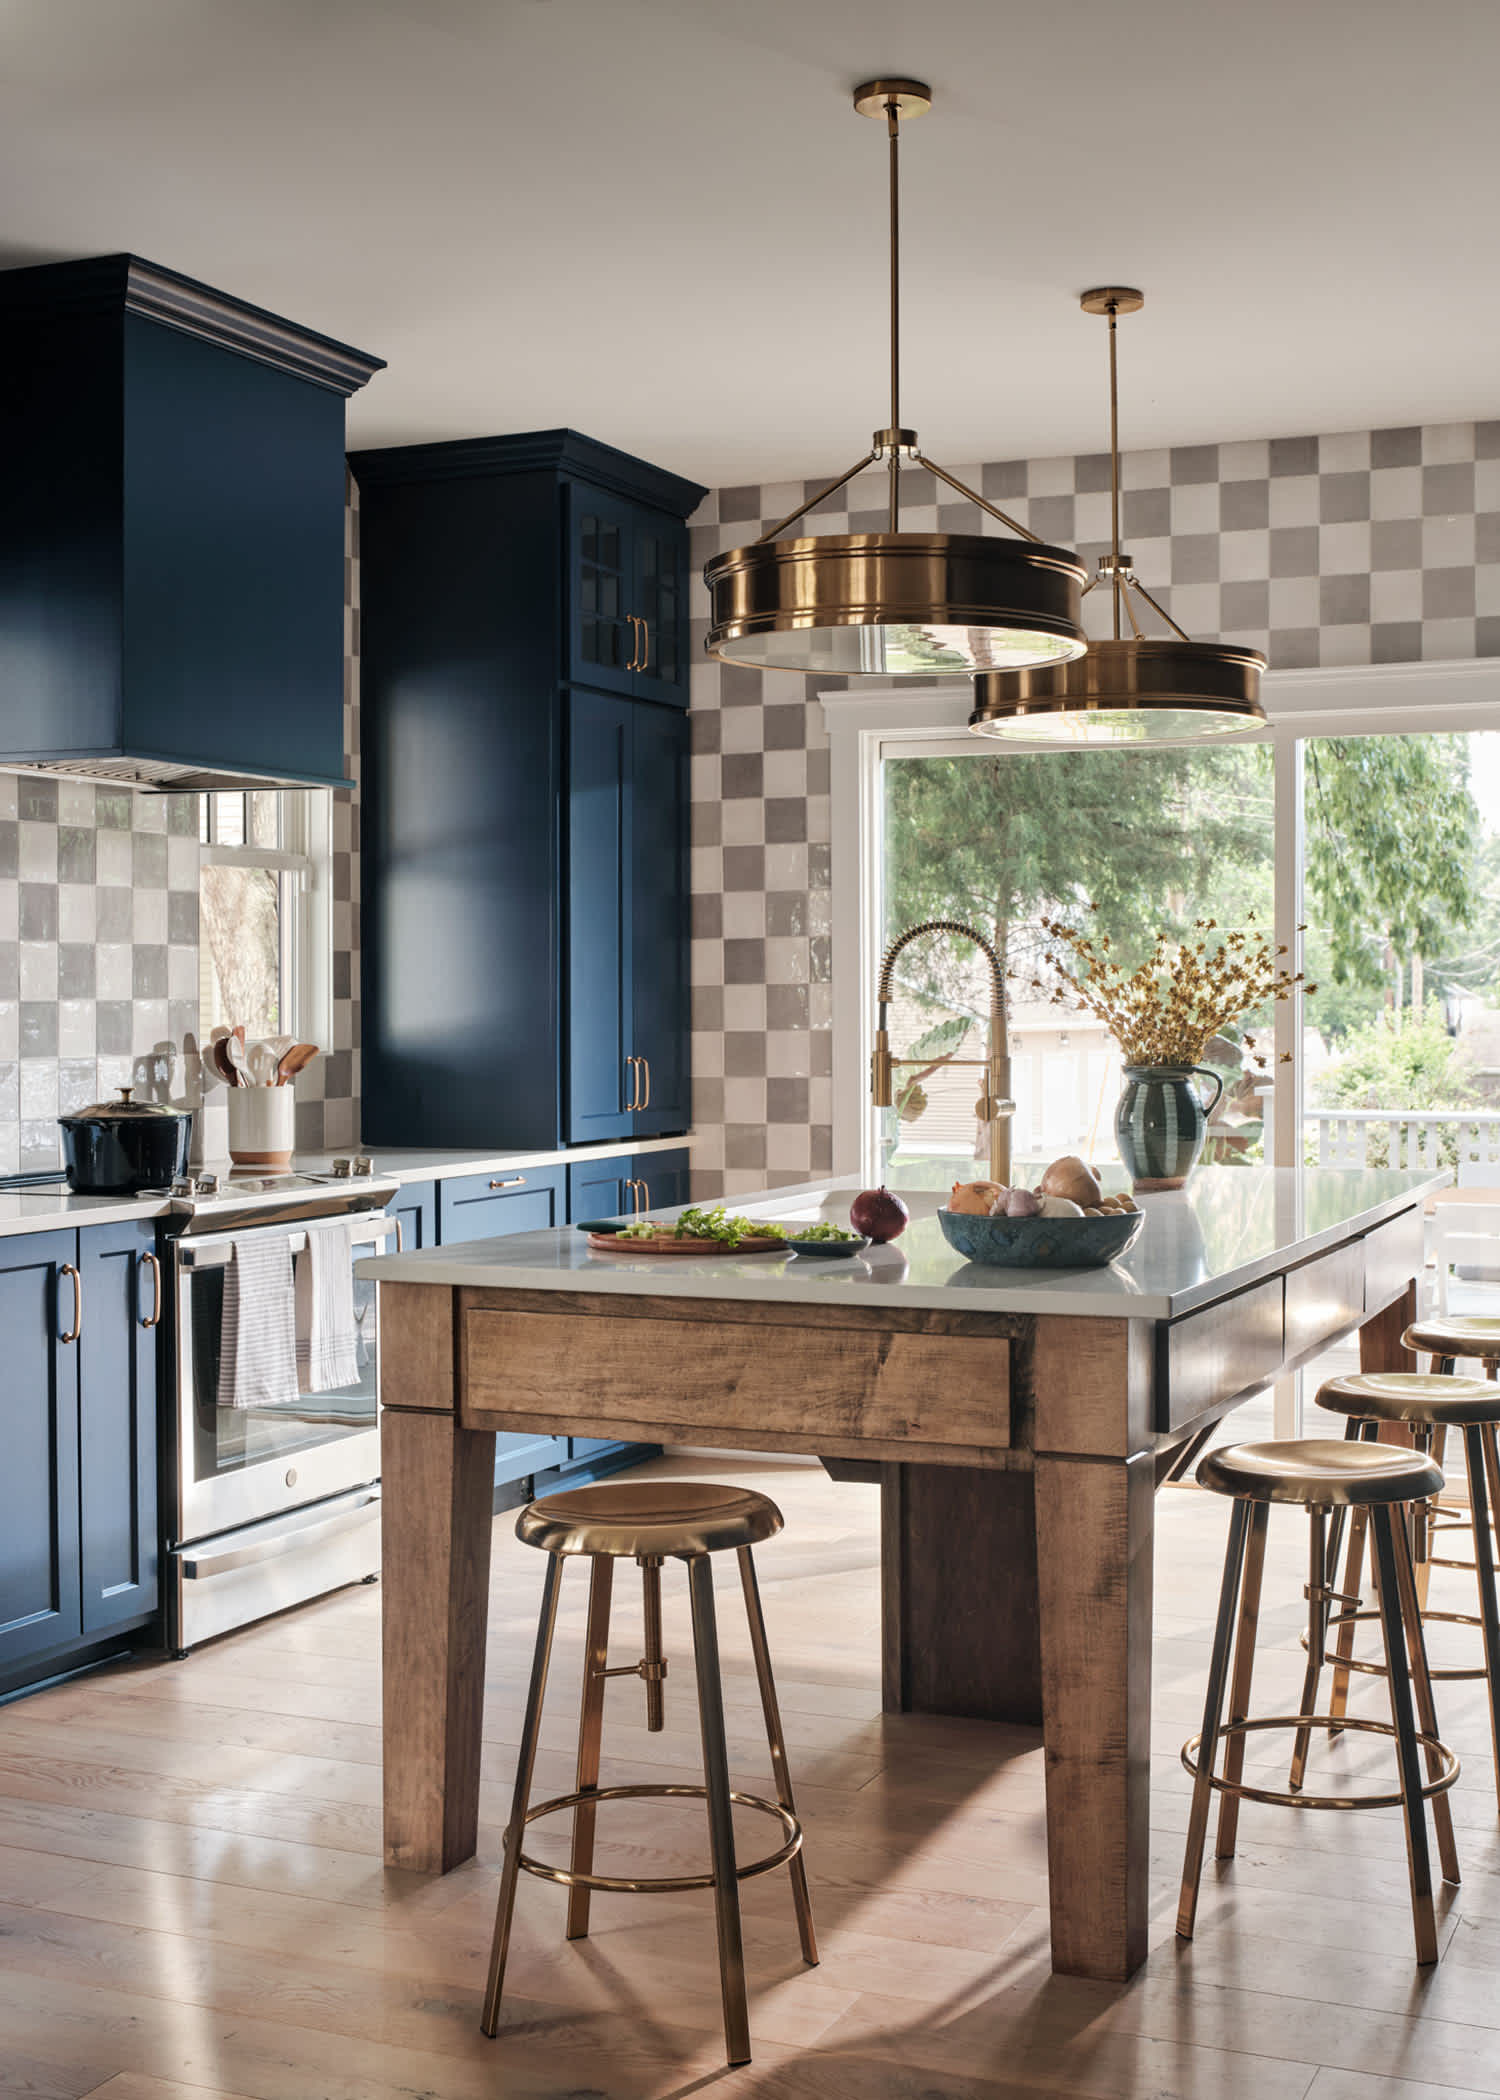 Valberg White Oak Engineered Hardwood Flooring in kitchen of HGTV 2023 Urban Oasis Home featuring dark blue floor to ceiling cabinets plus wood island with white countertop and checkered wallpaper